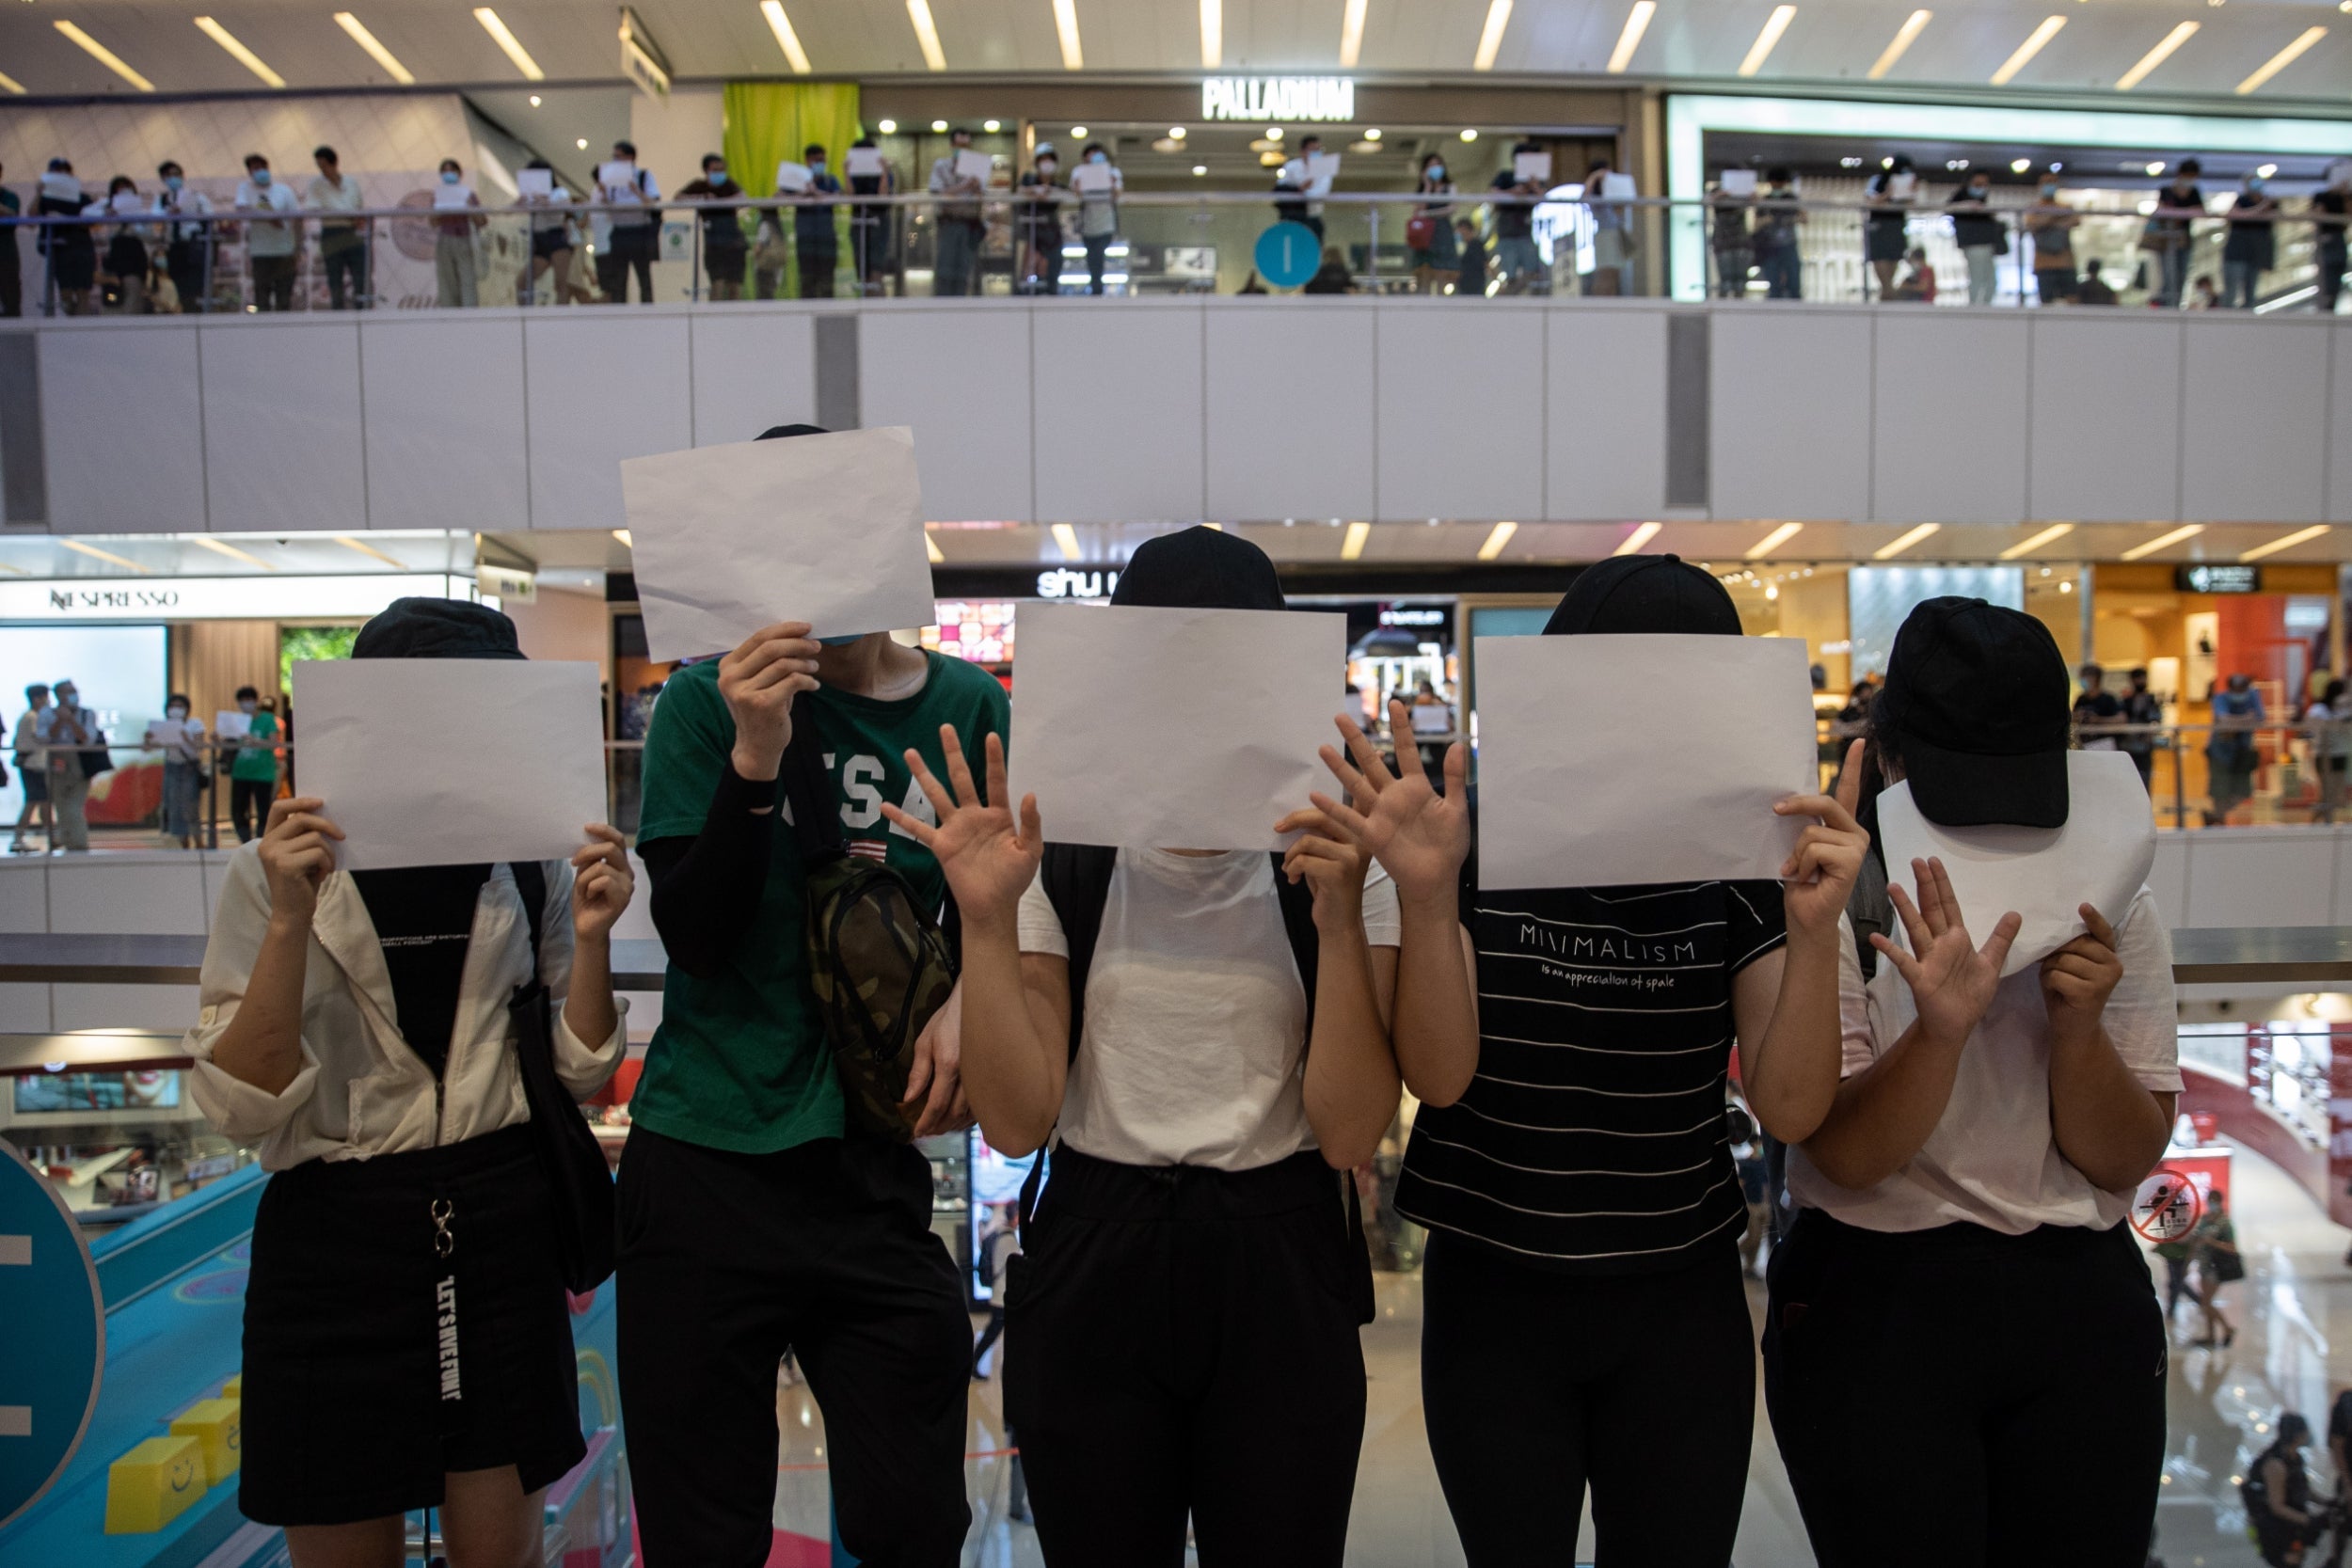 Protesters display blank sheets of white paper during a protest over freedom of speech in a shopping mall in Hong Kong on Monday